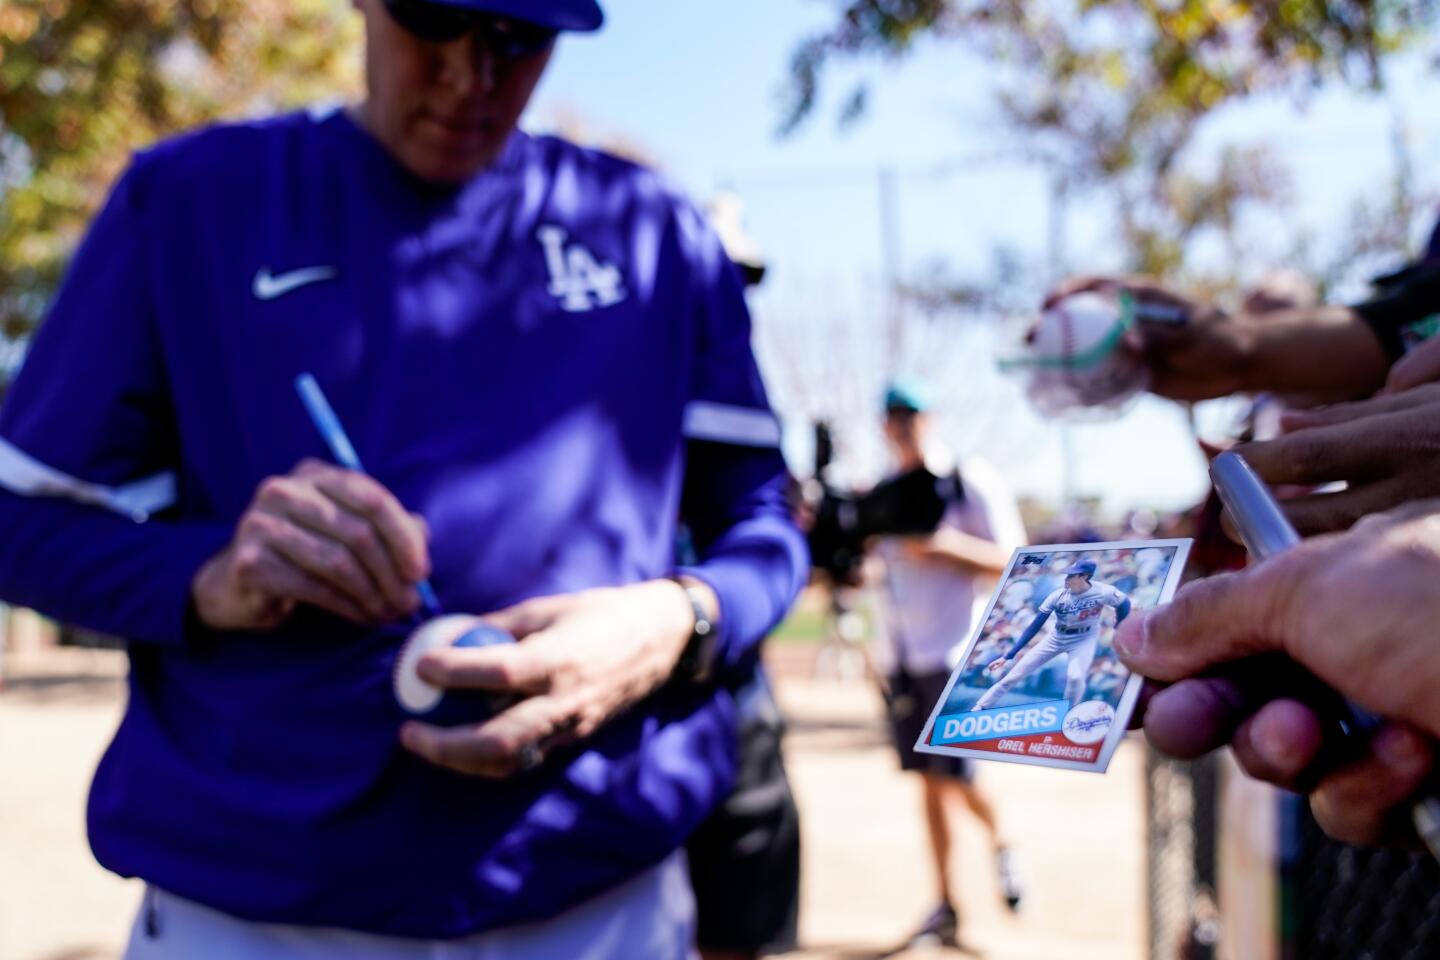 Robert Quesada of Beaumont holds Orel Hershiser's rookie card while he waits for the former Dodgers pitcher to autograph it during spring training.